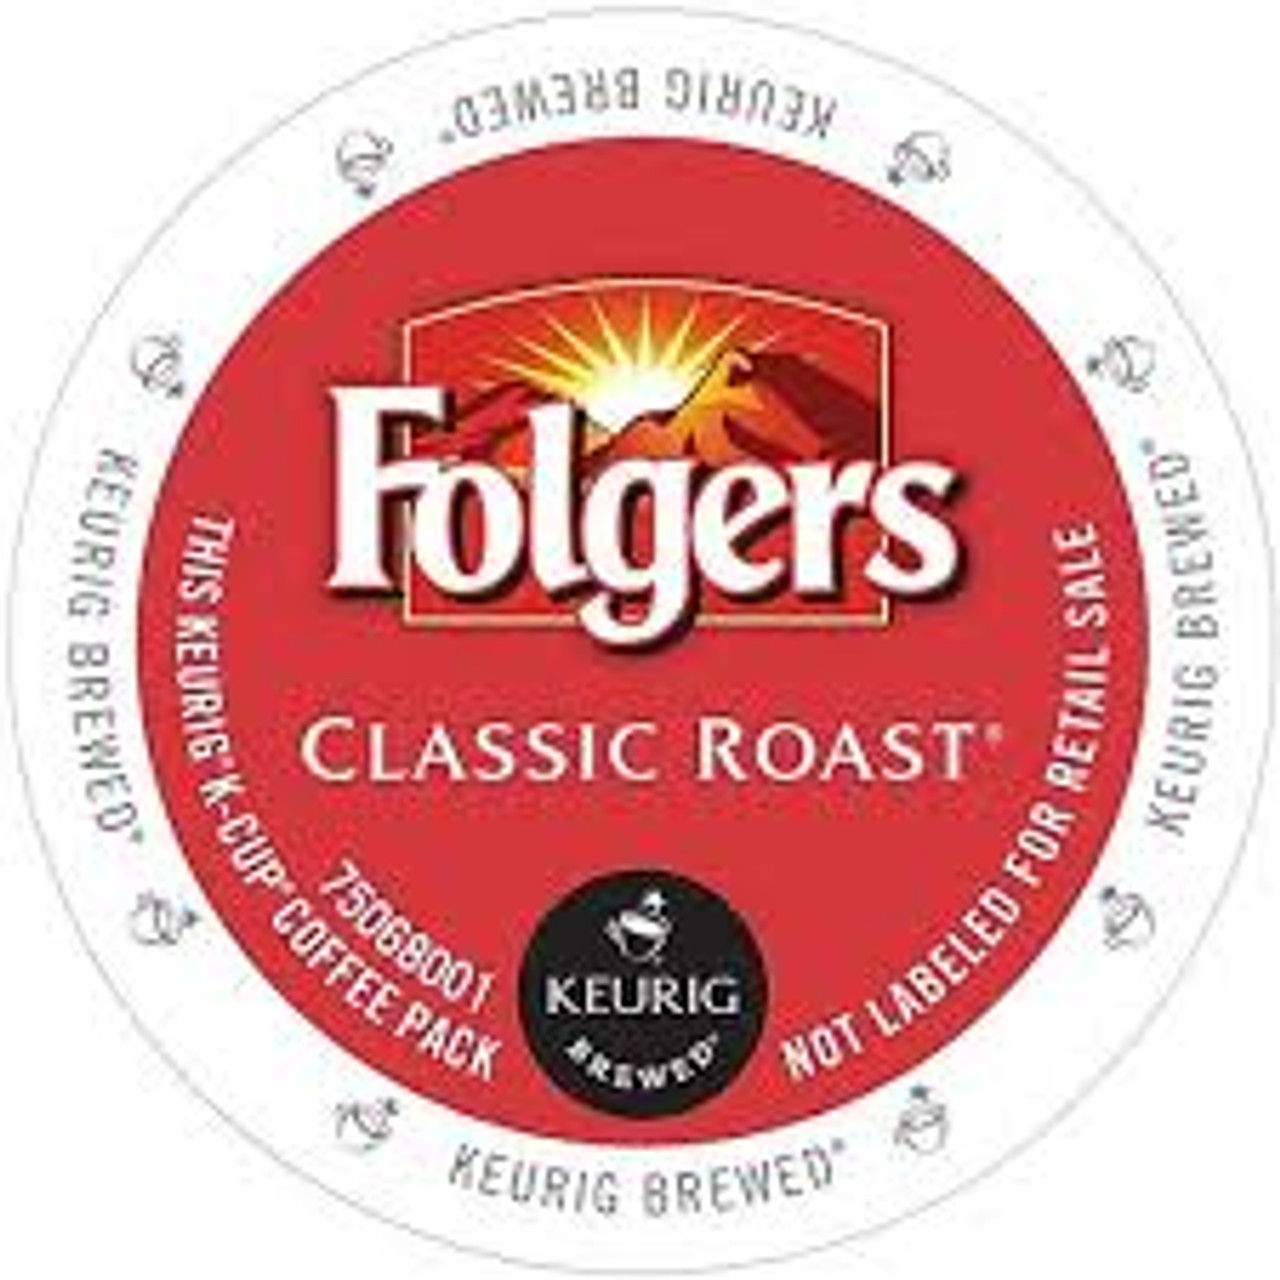 Wake up to something special with our gourmet-inspired Classic Roast®. Taste the rich, full-body flavor and distinct eye-opening aroma of one of America’s favorite cups of coffee for more than 150 years—so good it can only be Folgers Classic Roast®.